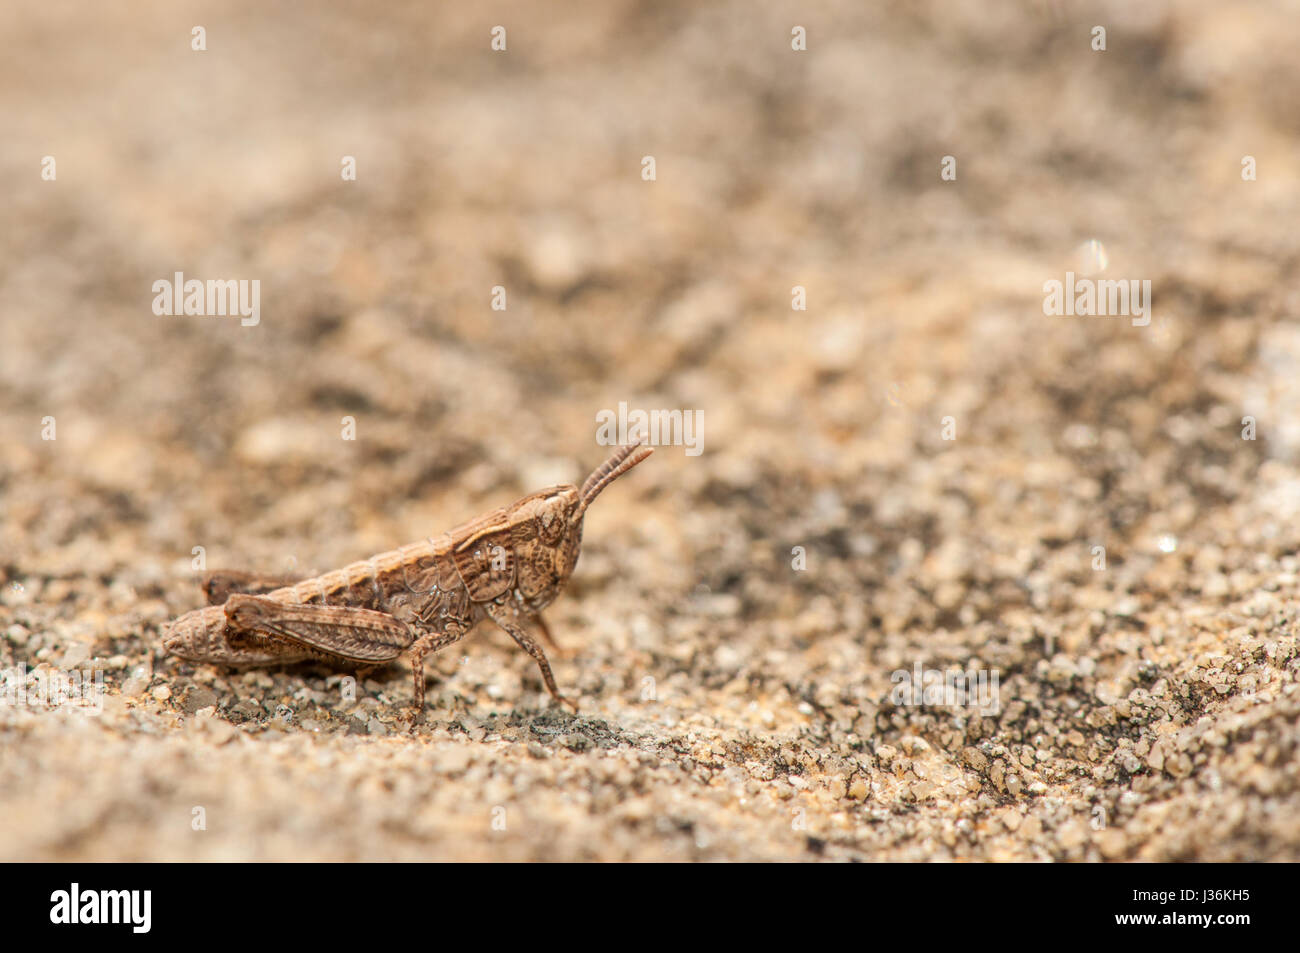 close-up view of a Common Groundhopper (Tetrix undulata) in the field Stock Photo